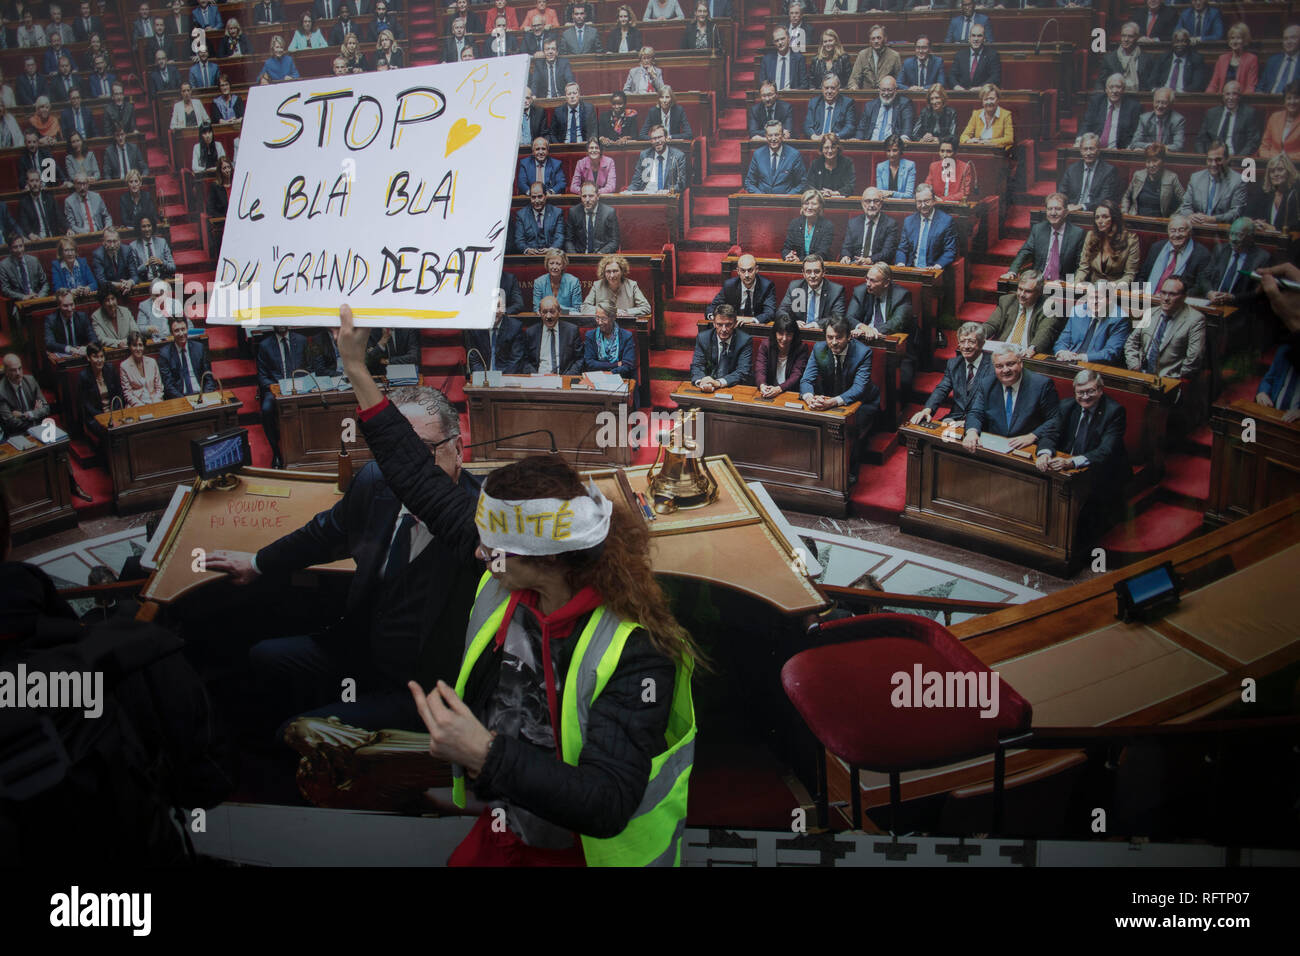 A protestor stands in front of an image of the parliament while holding a placard during a demonstration against macron policies. Yellow vest protestors gathered and march on the streets of Paris another Saturday on what they call the Act XI against the French president Emmanuel Macron policies. Stock Photo